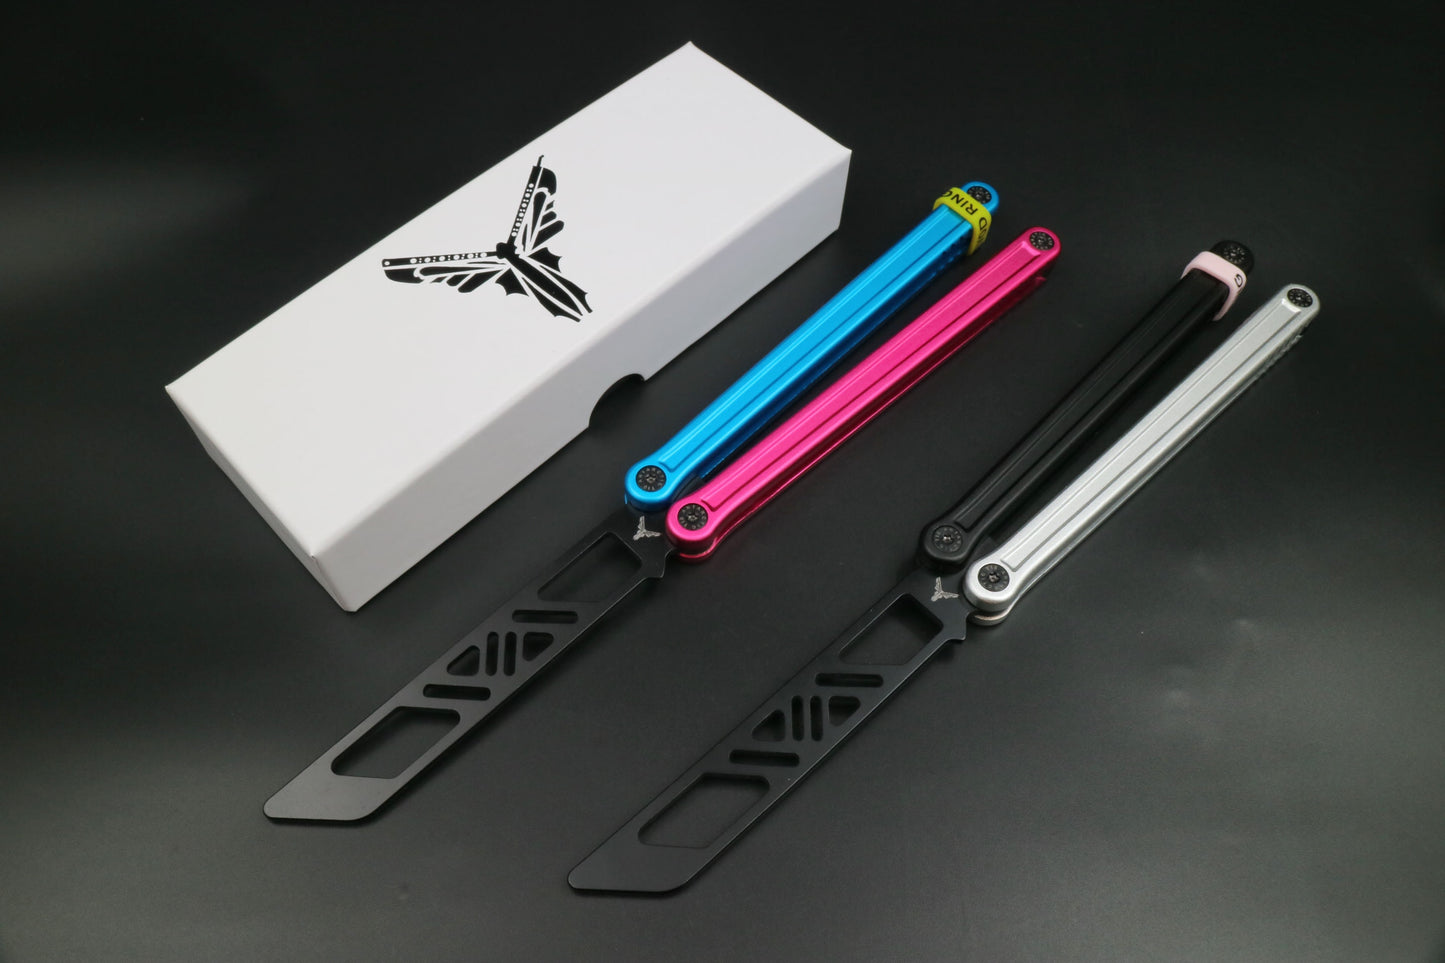 XDYY Antarctic 2 balisong trainer, pink blue and black silver